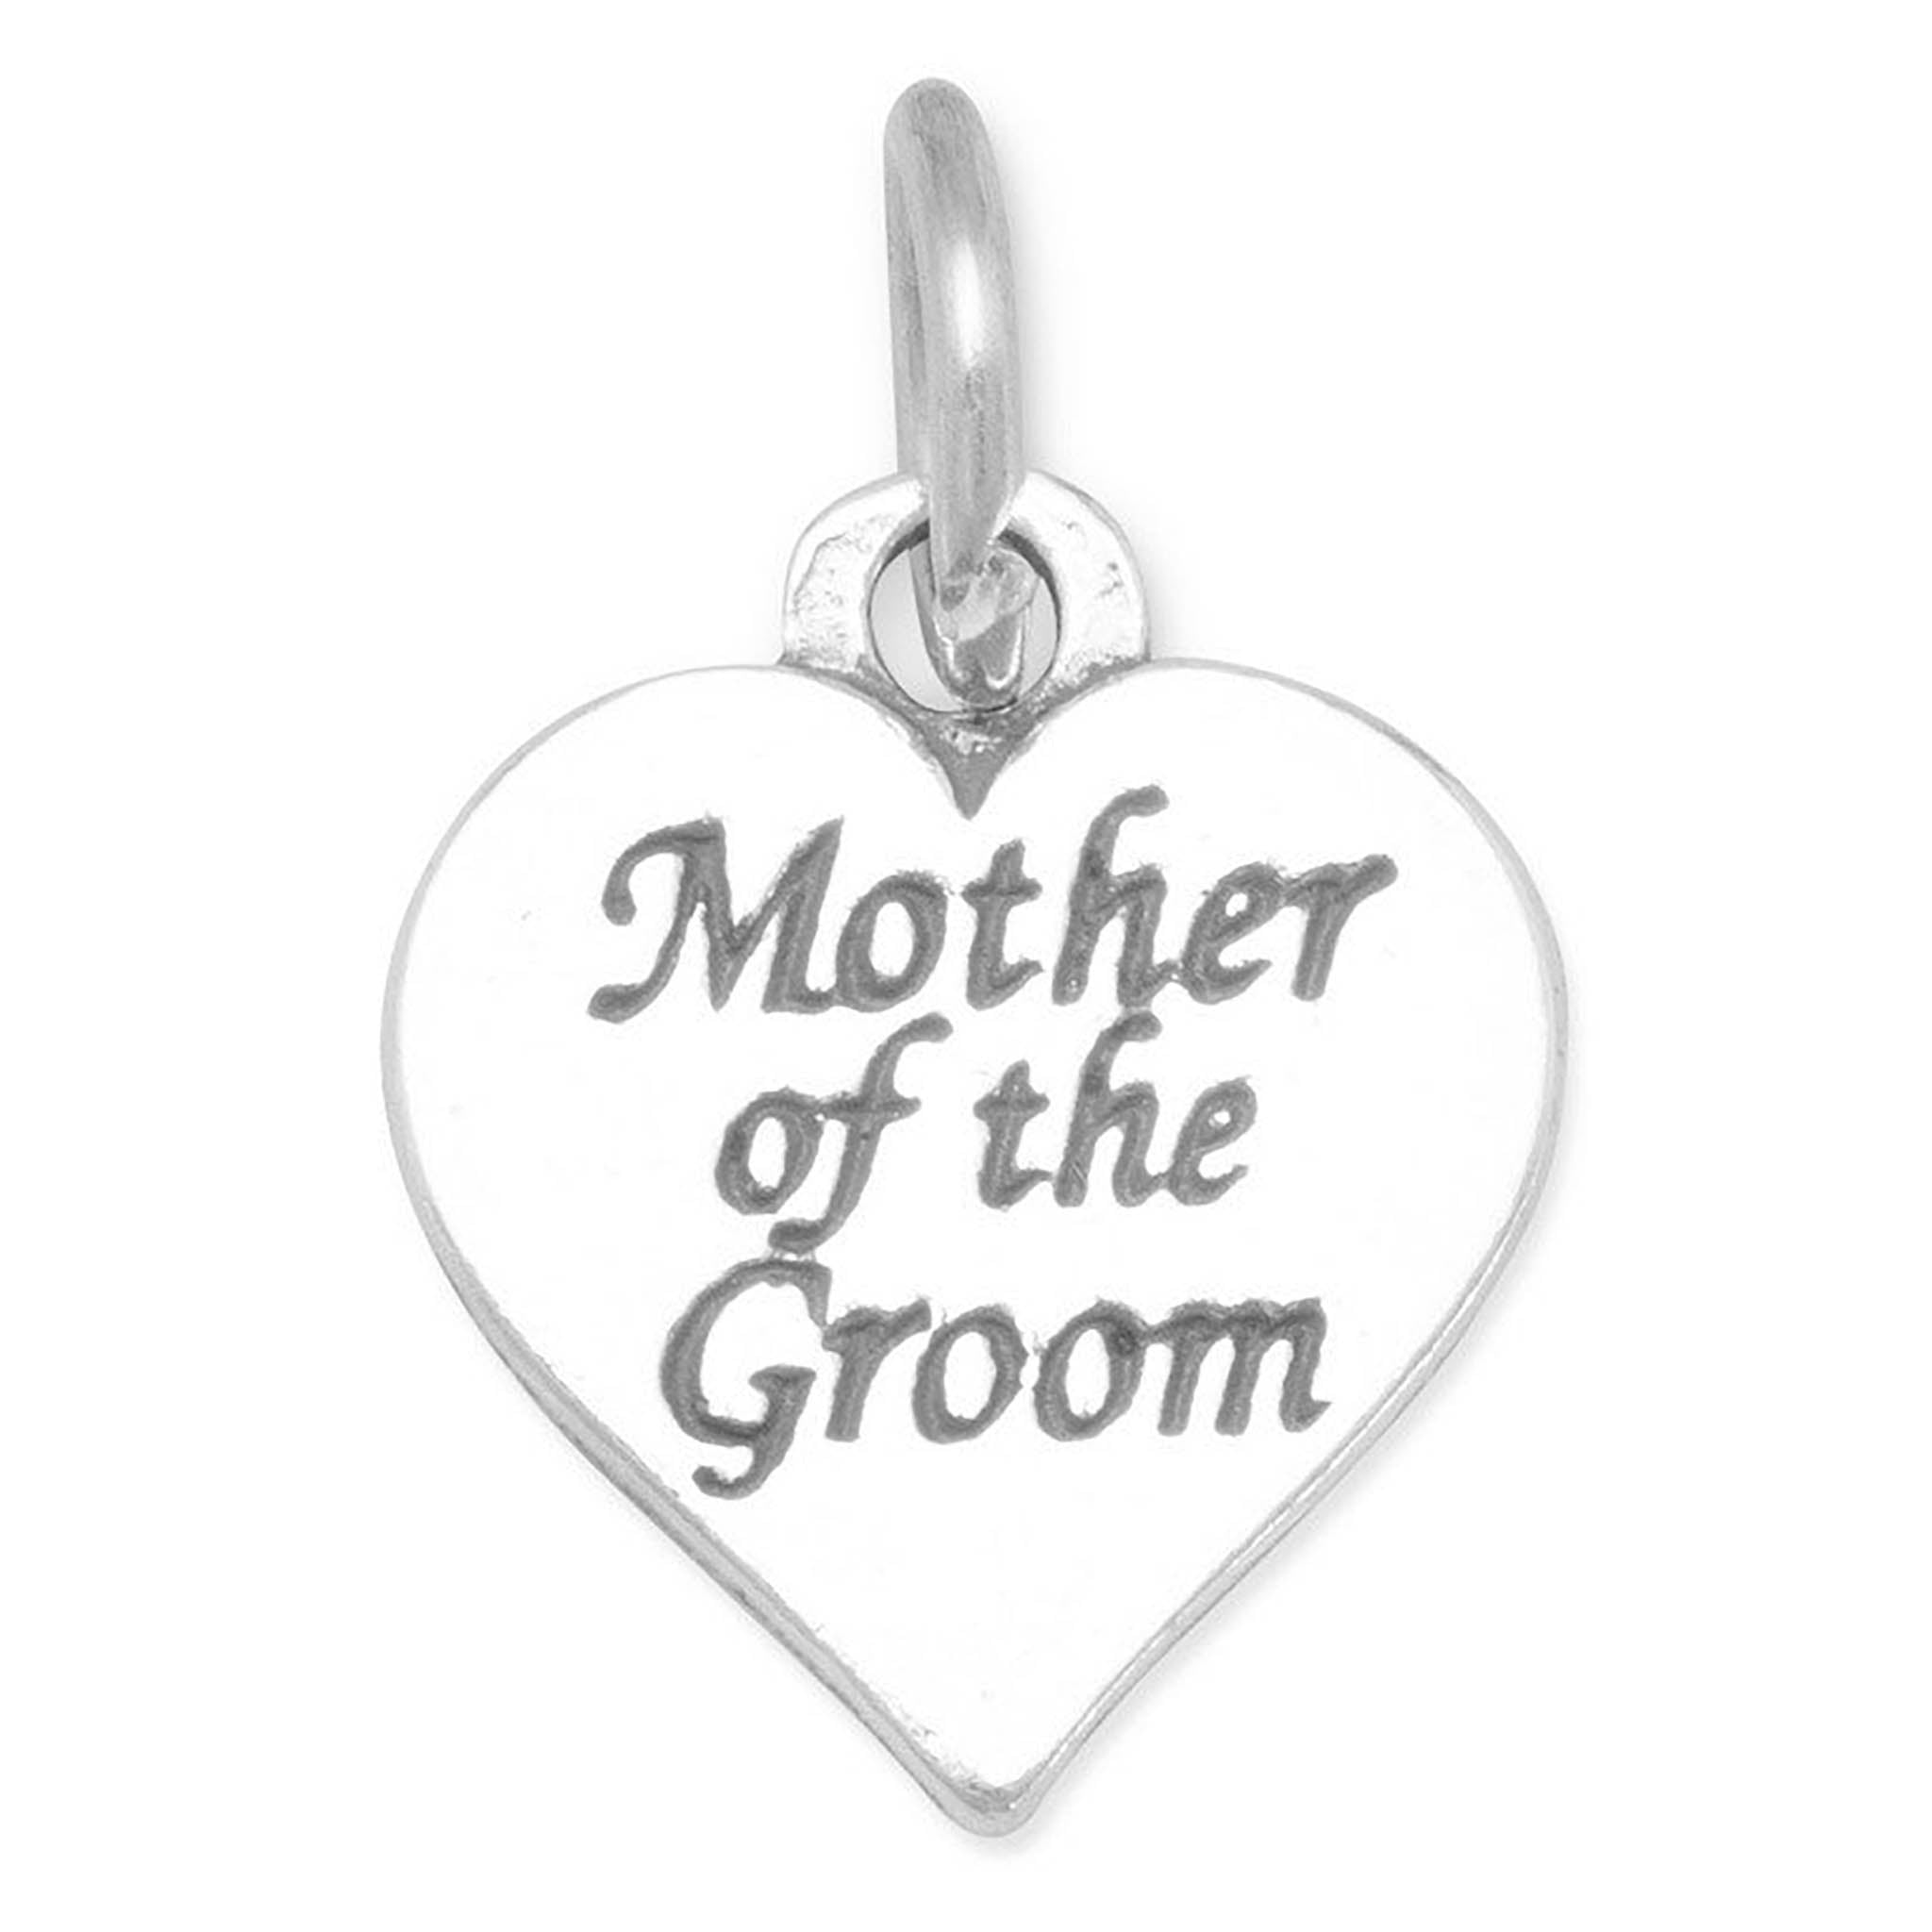 Mother of the Groom Charm